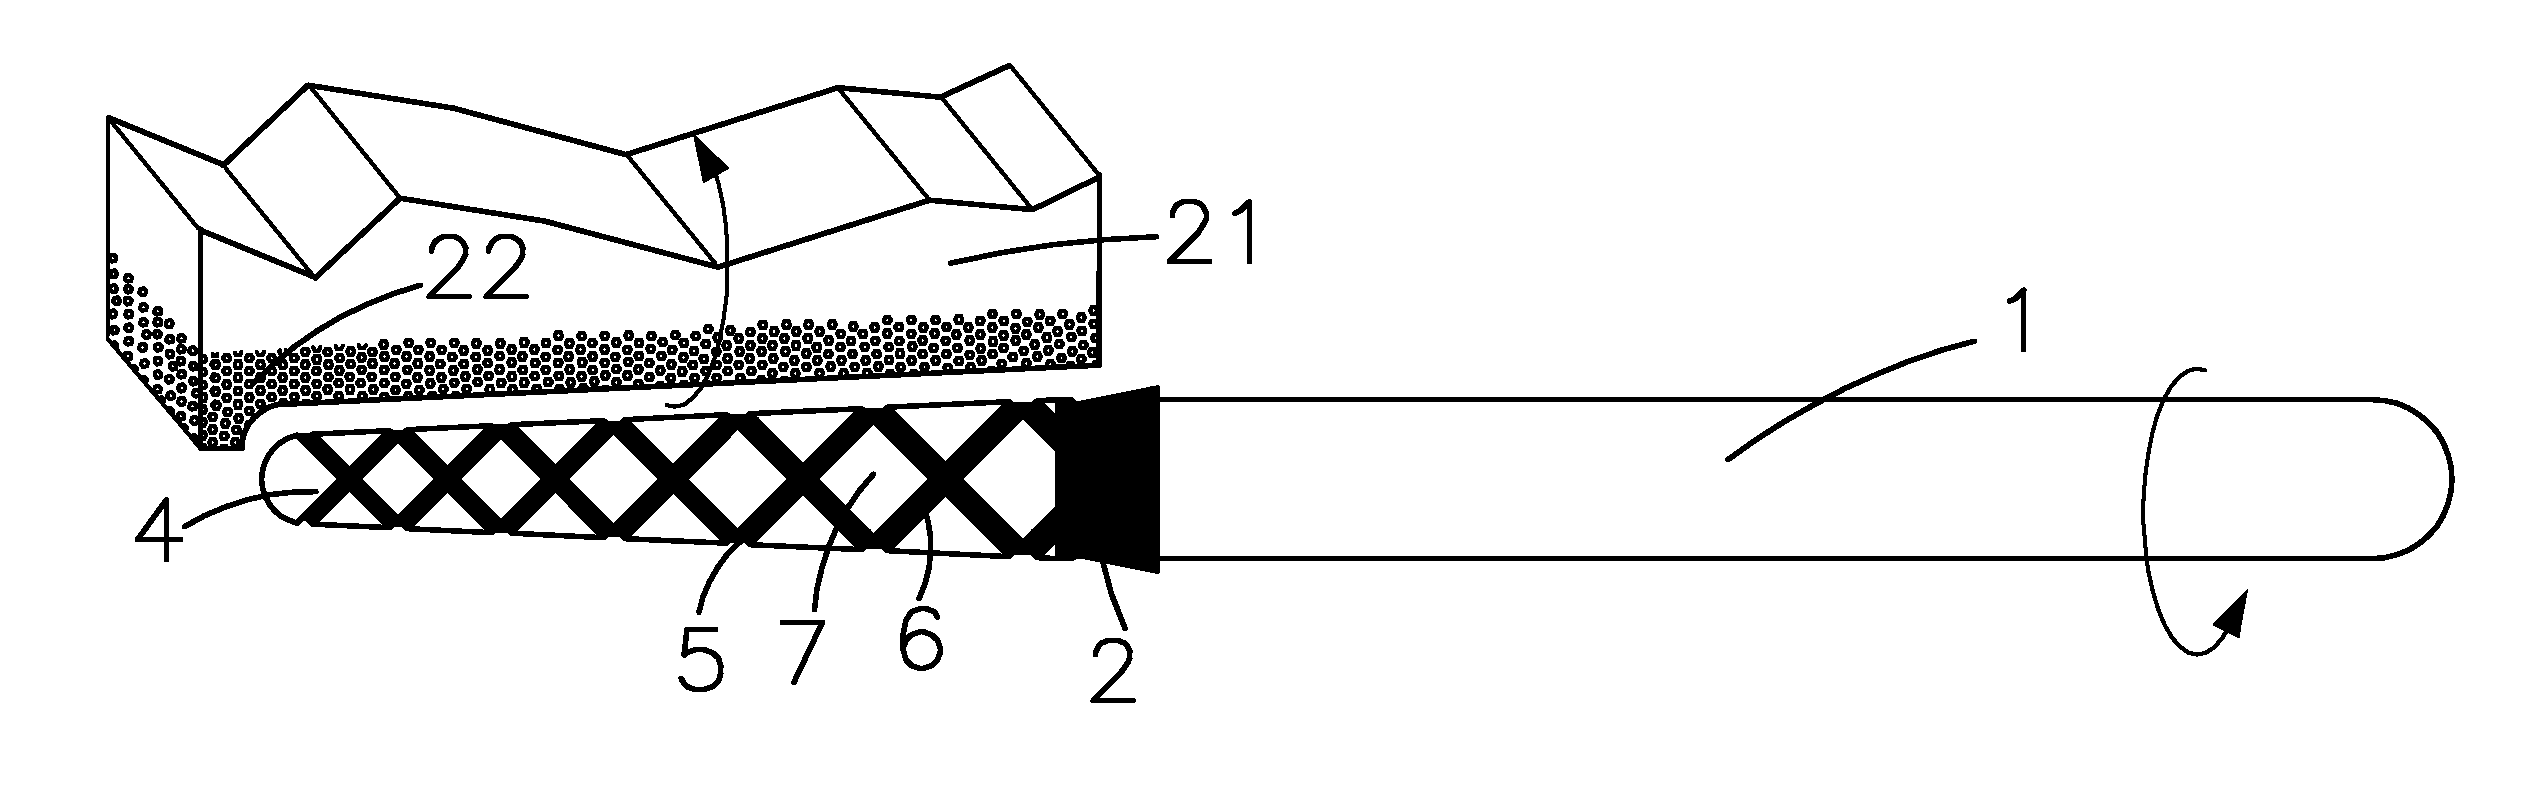 Method for applying a powdered-diamond coating to the surface of cutters for dentistry excluding slot surfaces